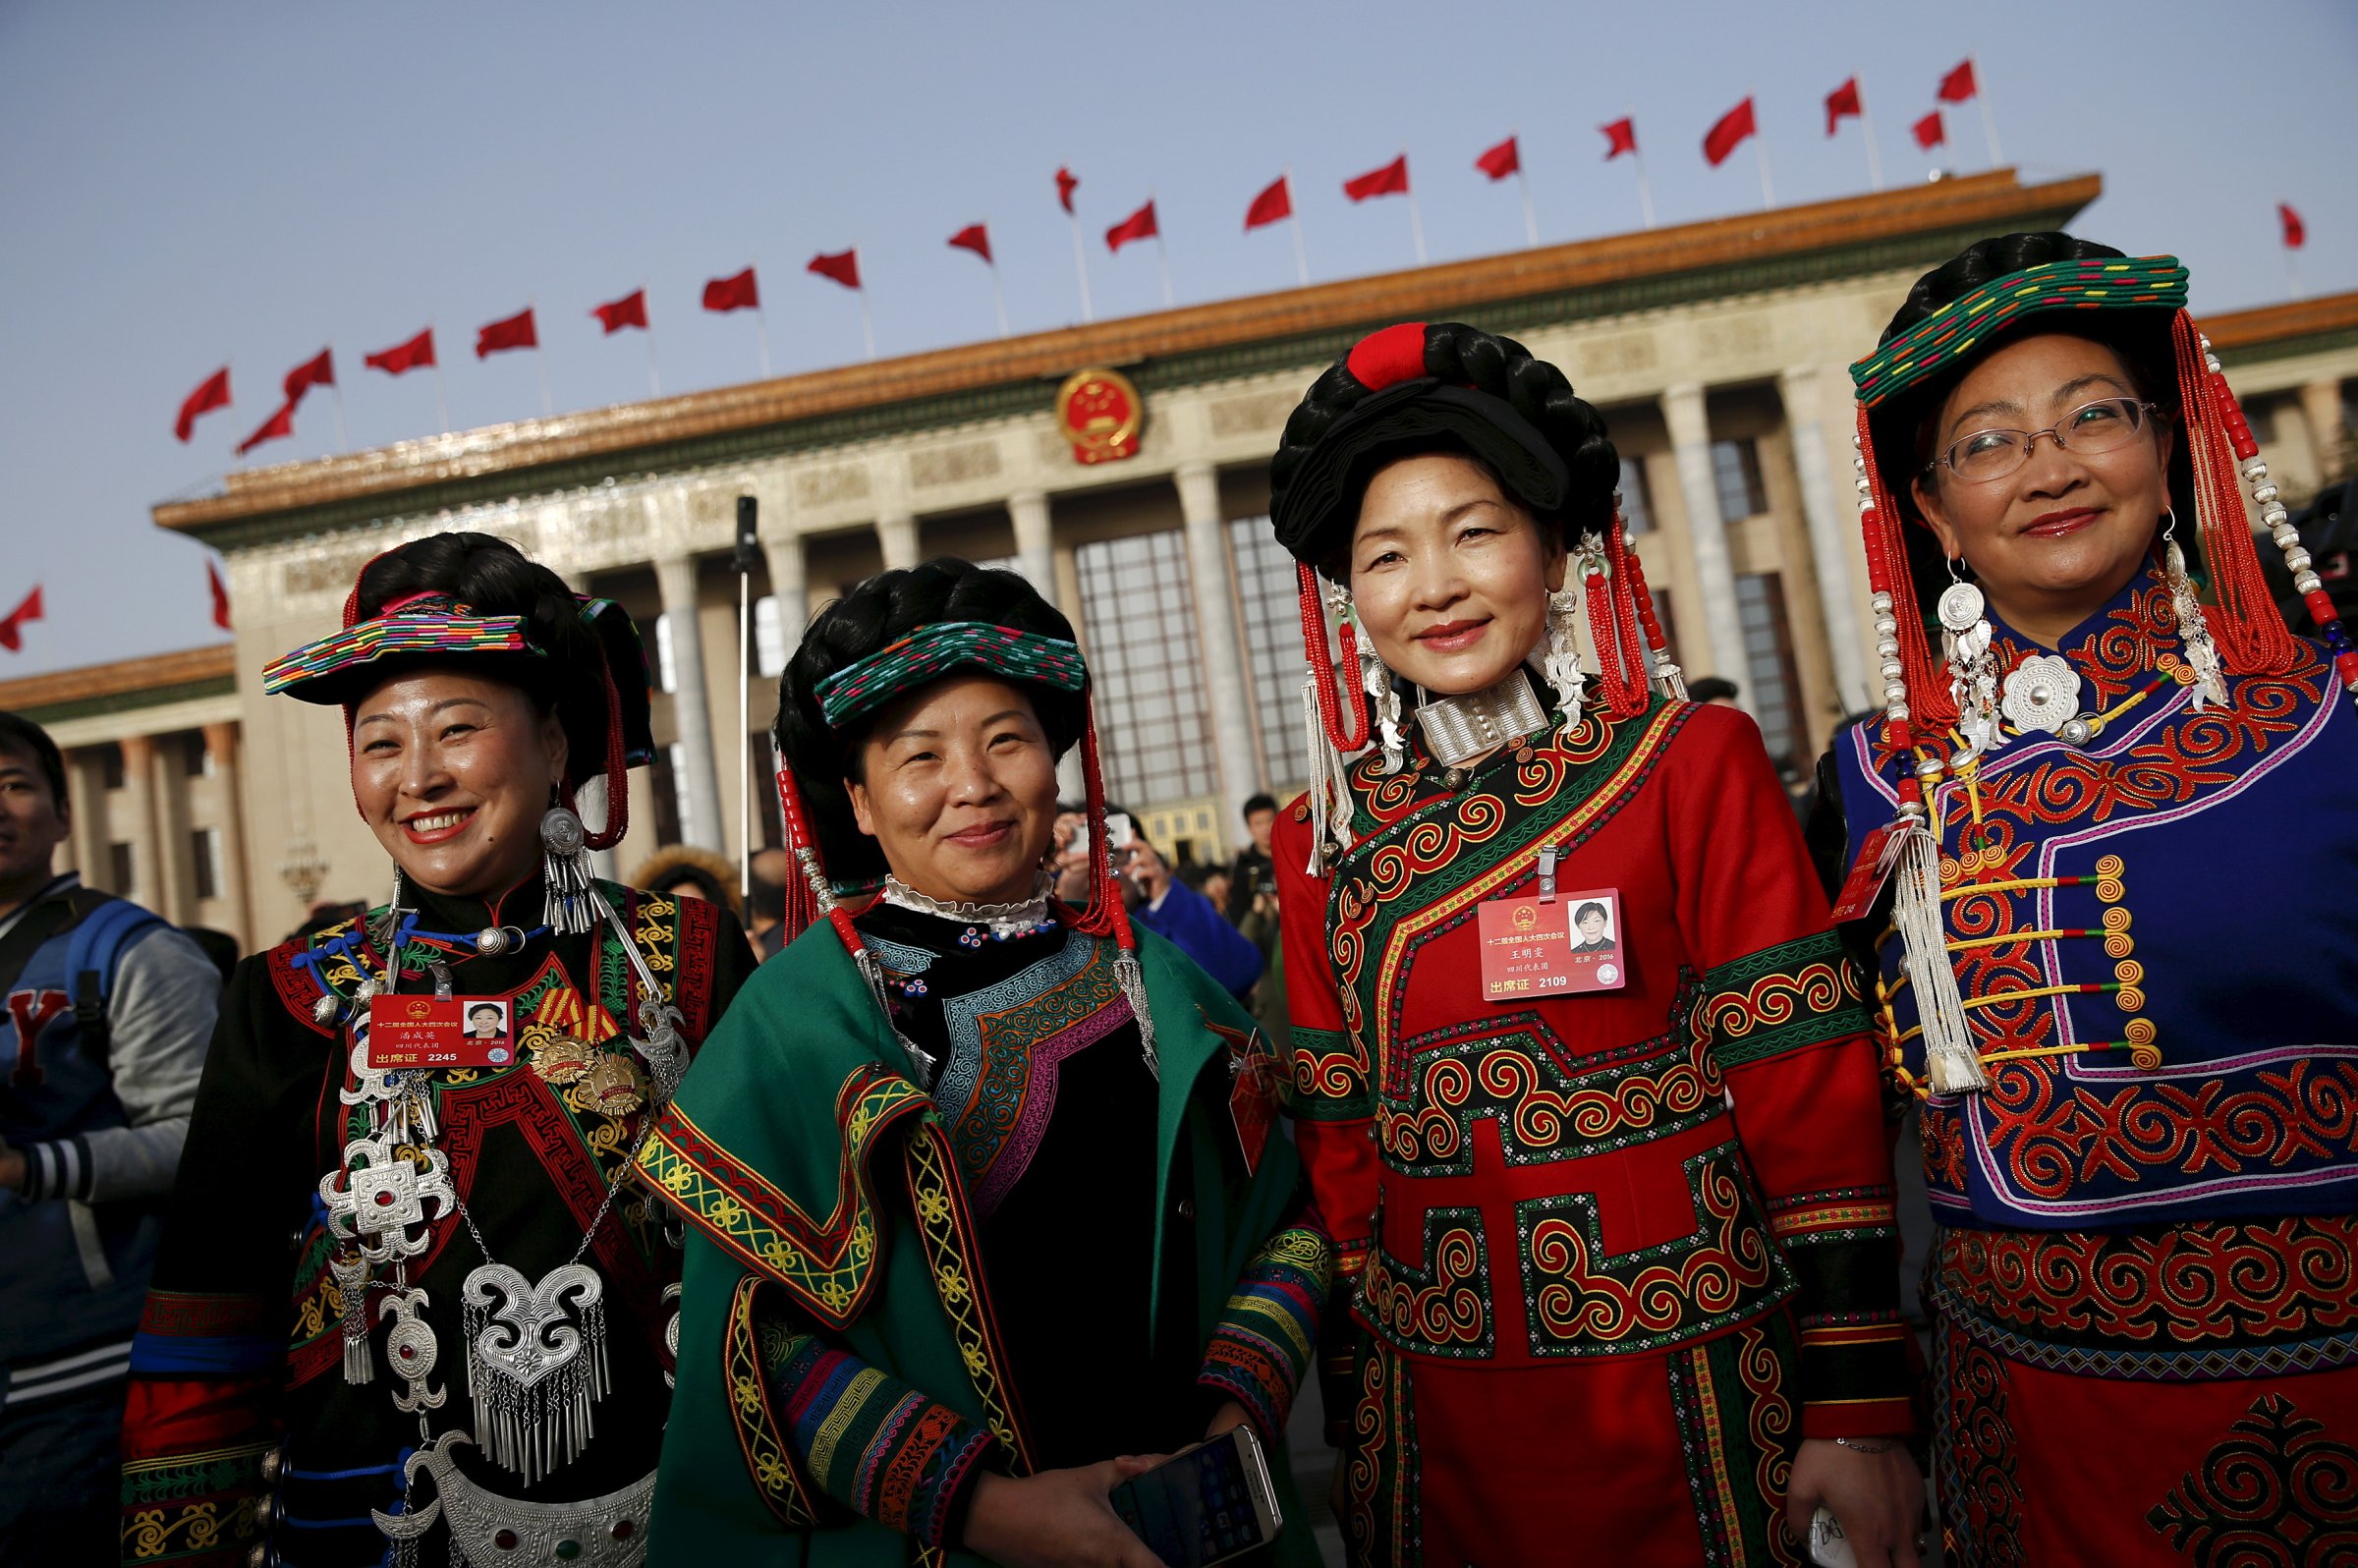 Ethnic minority delegates pose for pictures outside the Great Hall of the People ahead of the opening session of the National People's Congress in Beijing